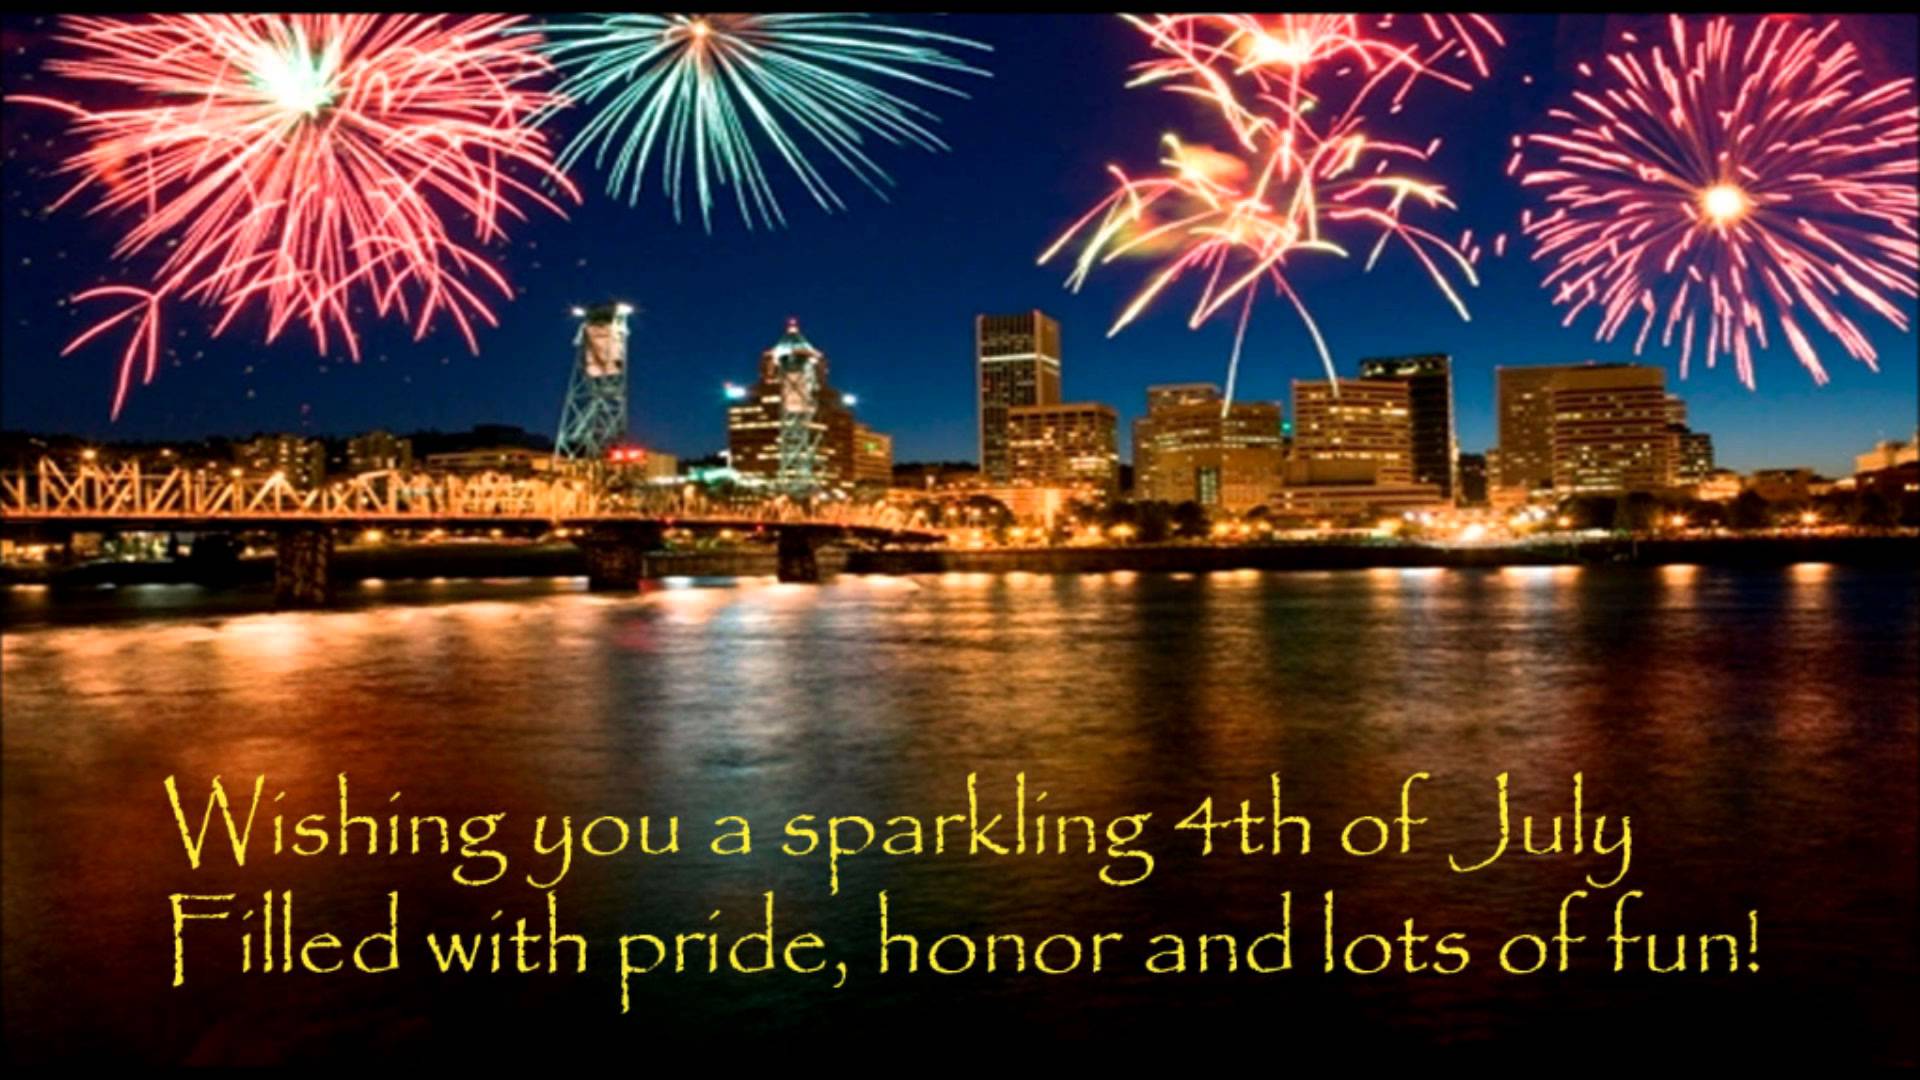 wishing you a sparkling 4th of july filled with pride, honor and lots of fun